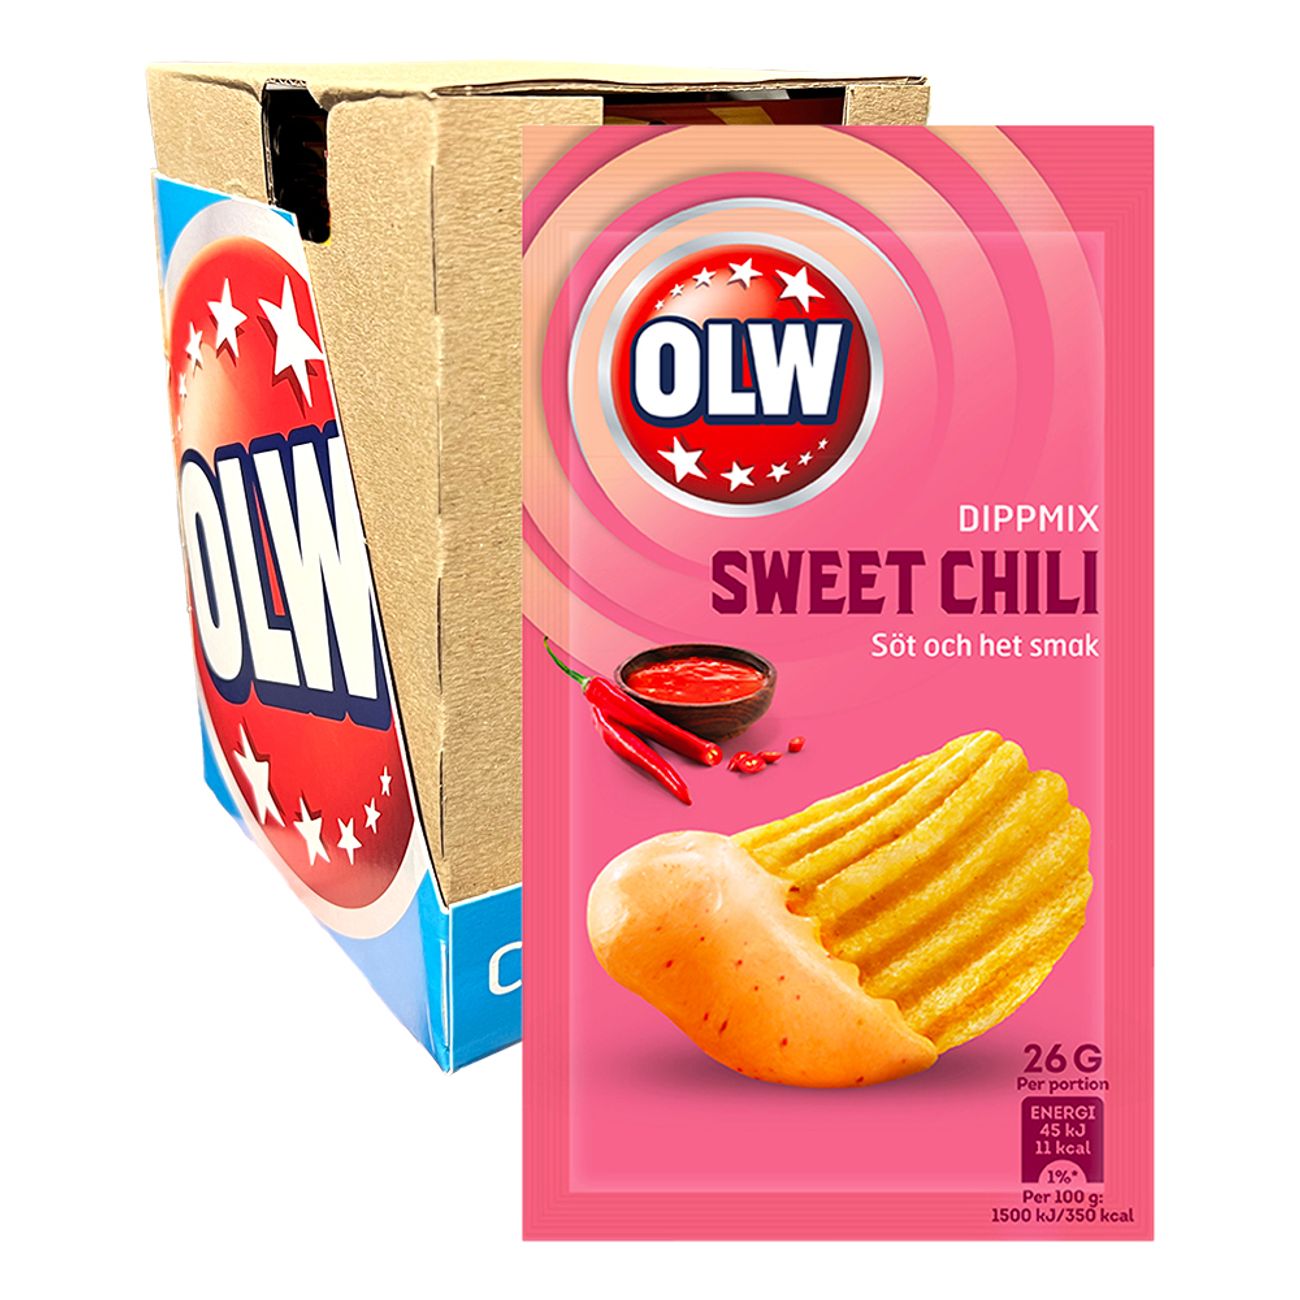 olw-dipmix-sweet-chili-storpack-79861-2